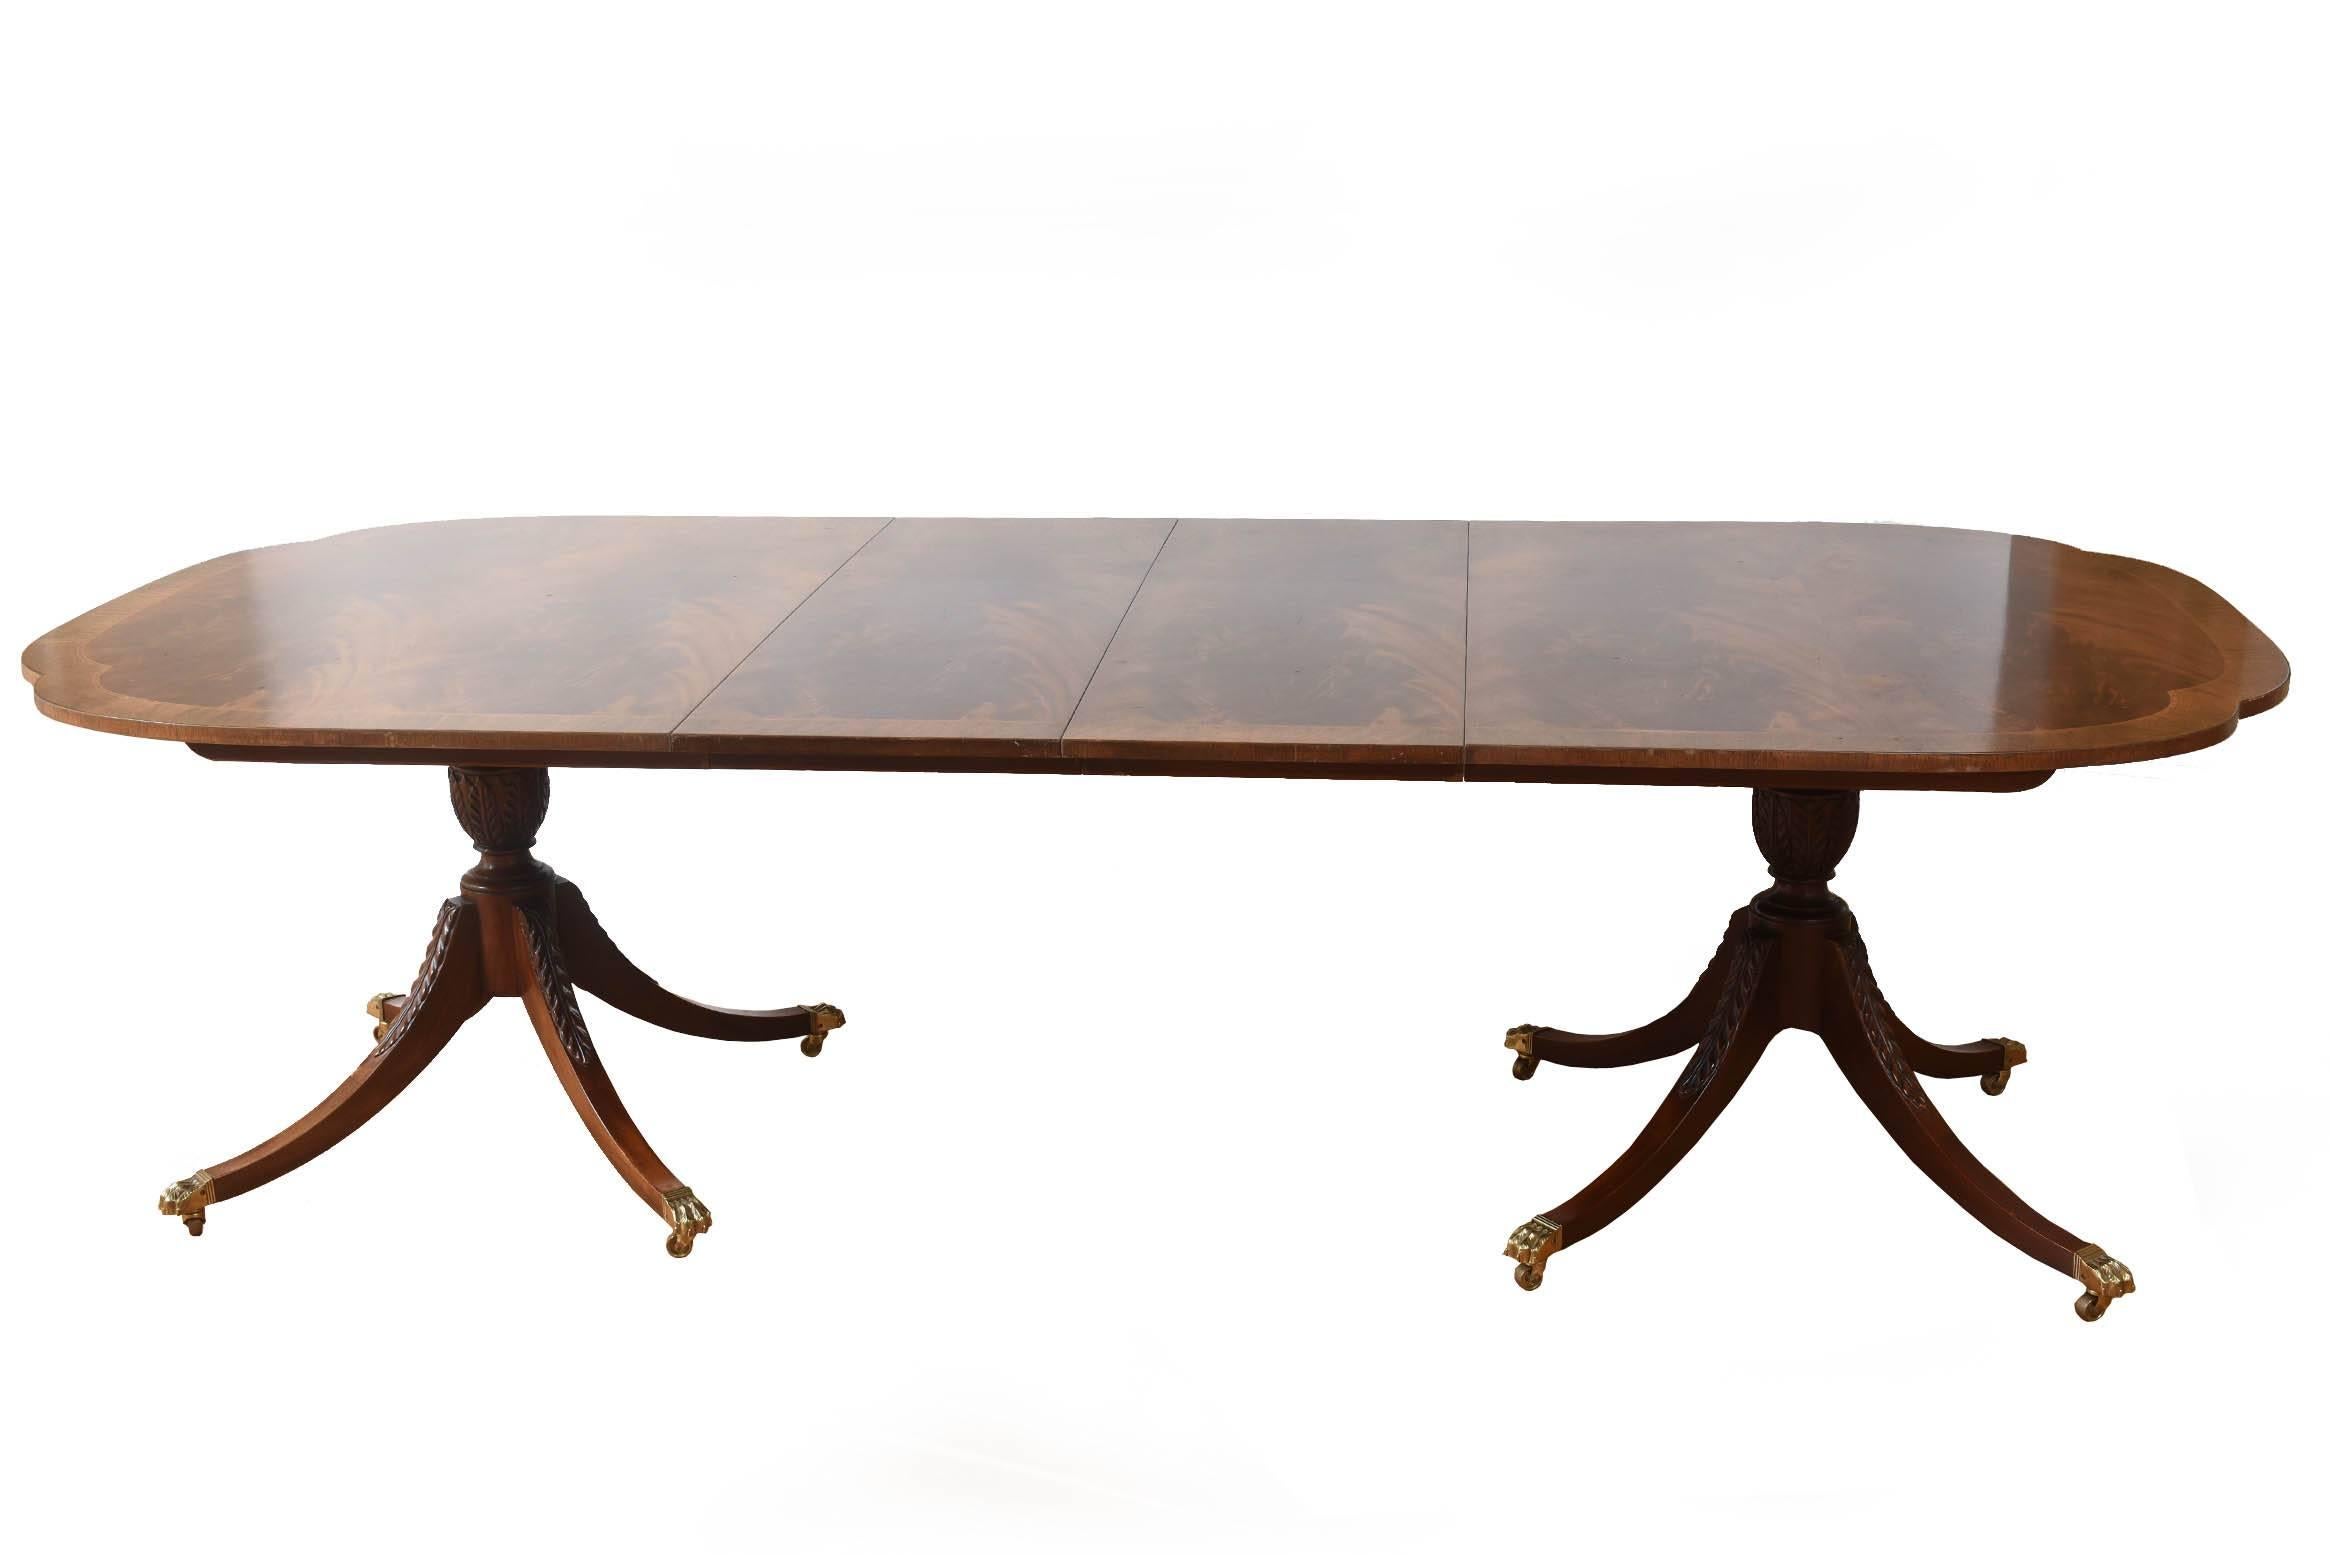 A classic and elegant dining room table with satinwood inlaid and twin pedestal bases. Wonderful flame mahogany veneer and featuring two leaves. Very nice vintage condition and ready for the holidays!
Dining table having shaped banded inlaid top on